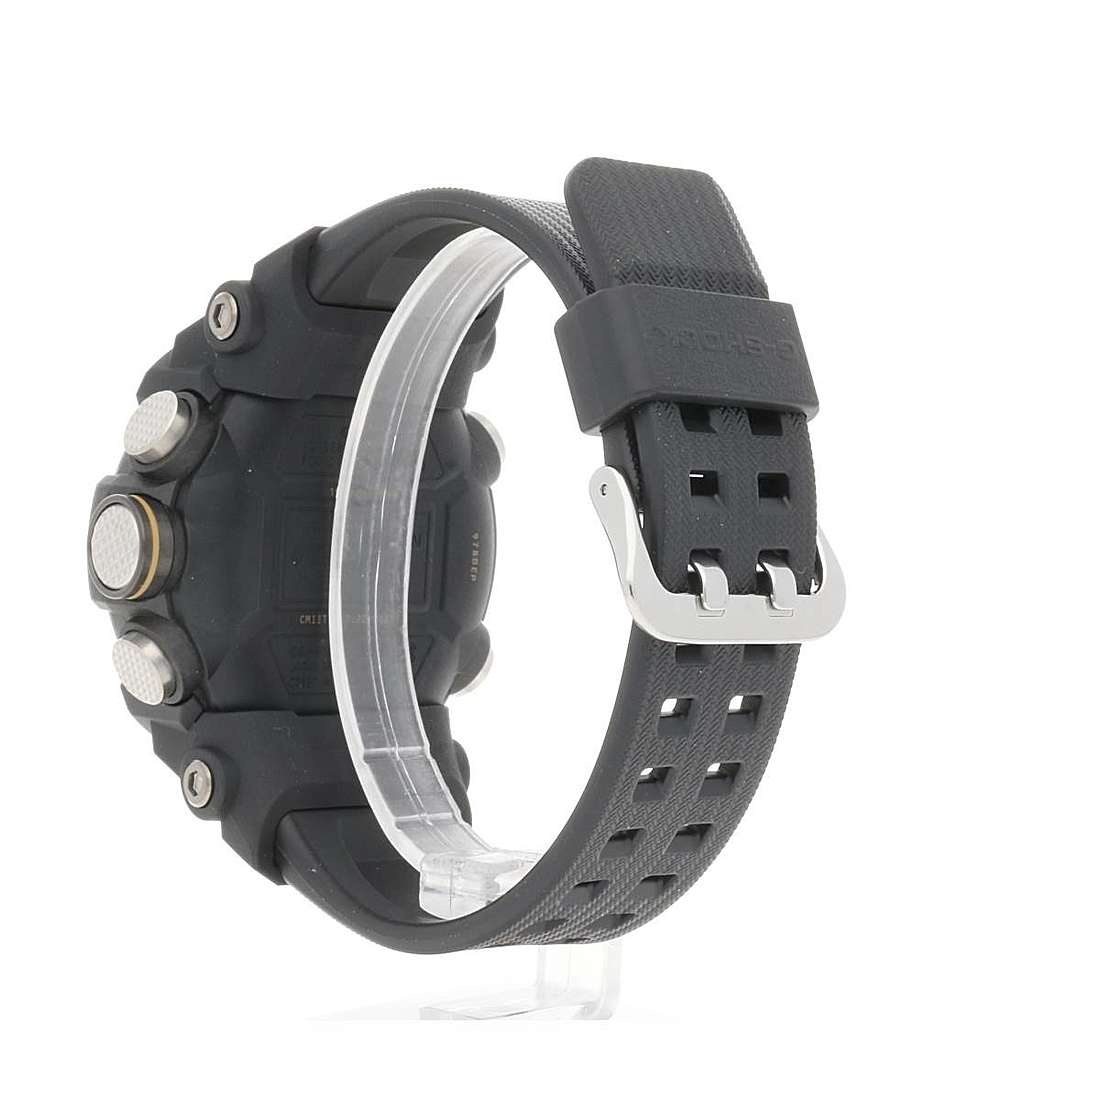 Offres montres homme G-Shock GG-B100-1AER